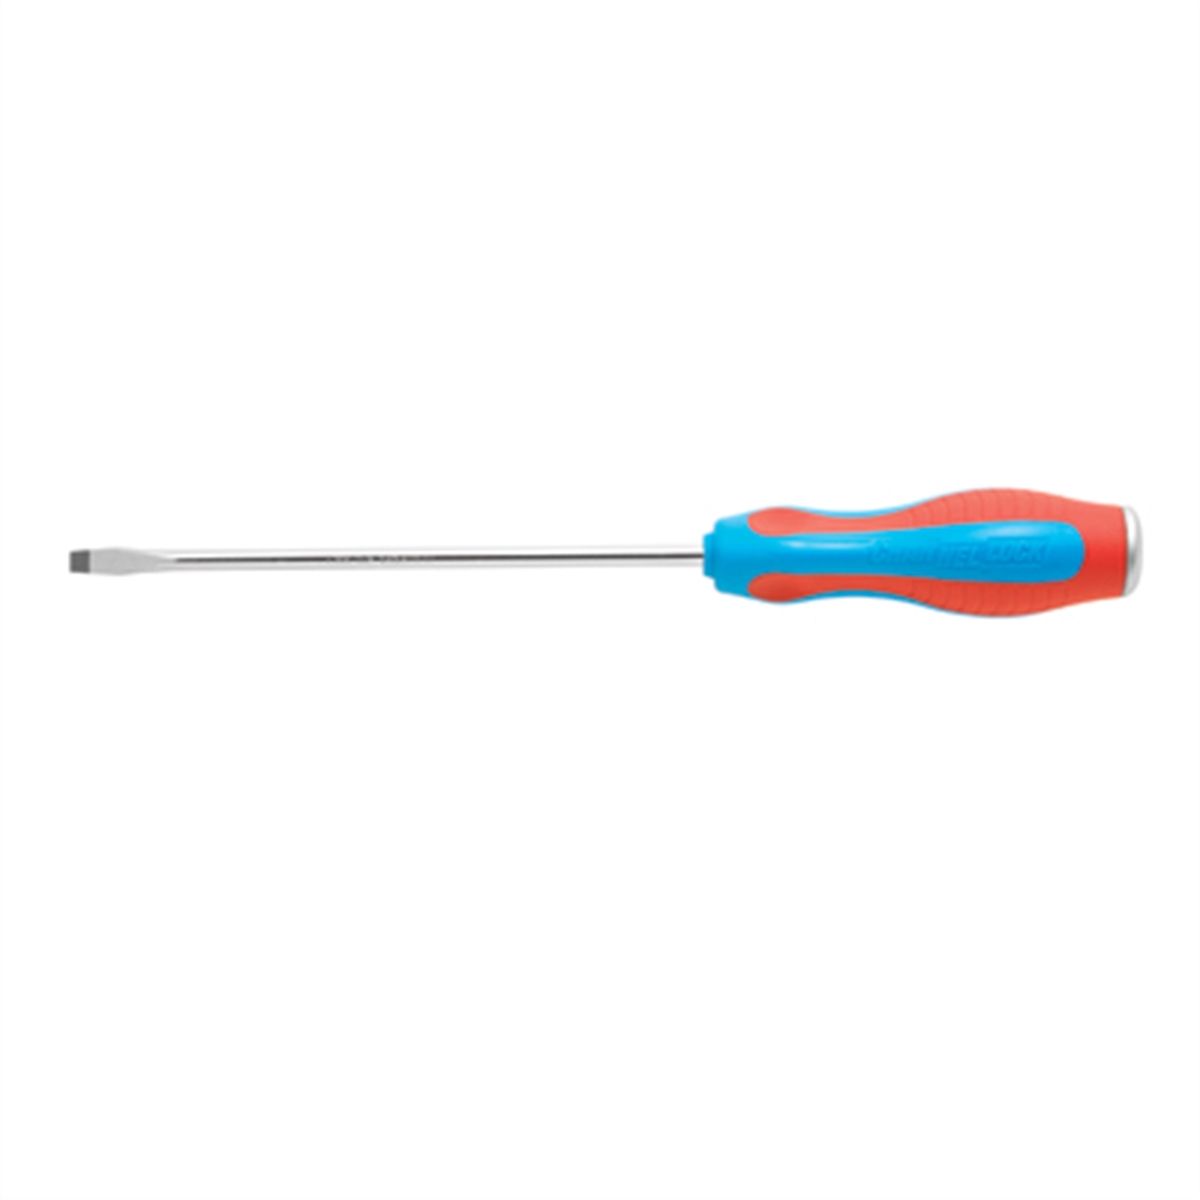 3/16" X 6" Blade Slotted Screwdriver